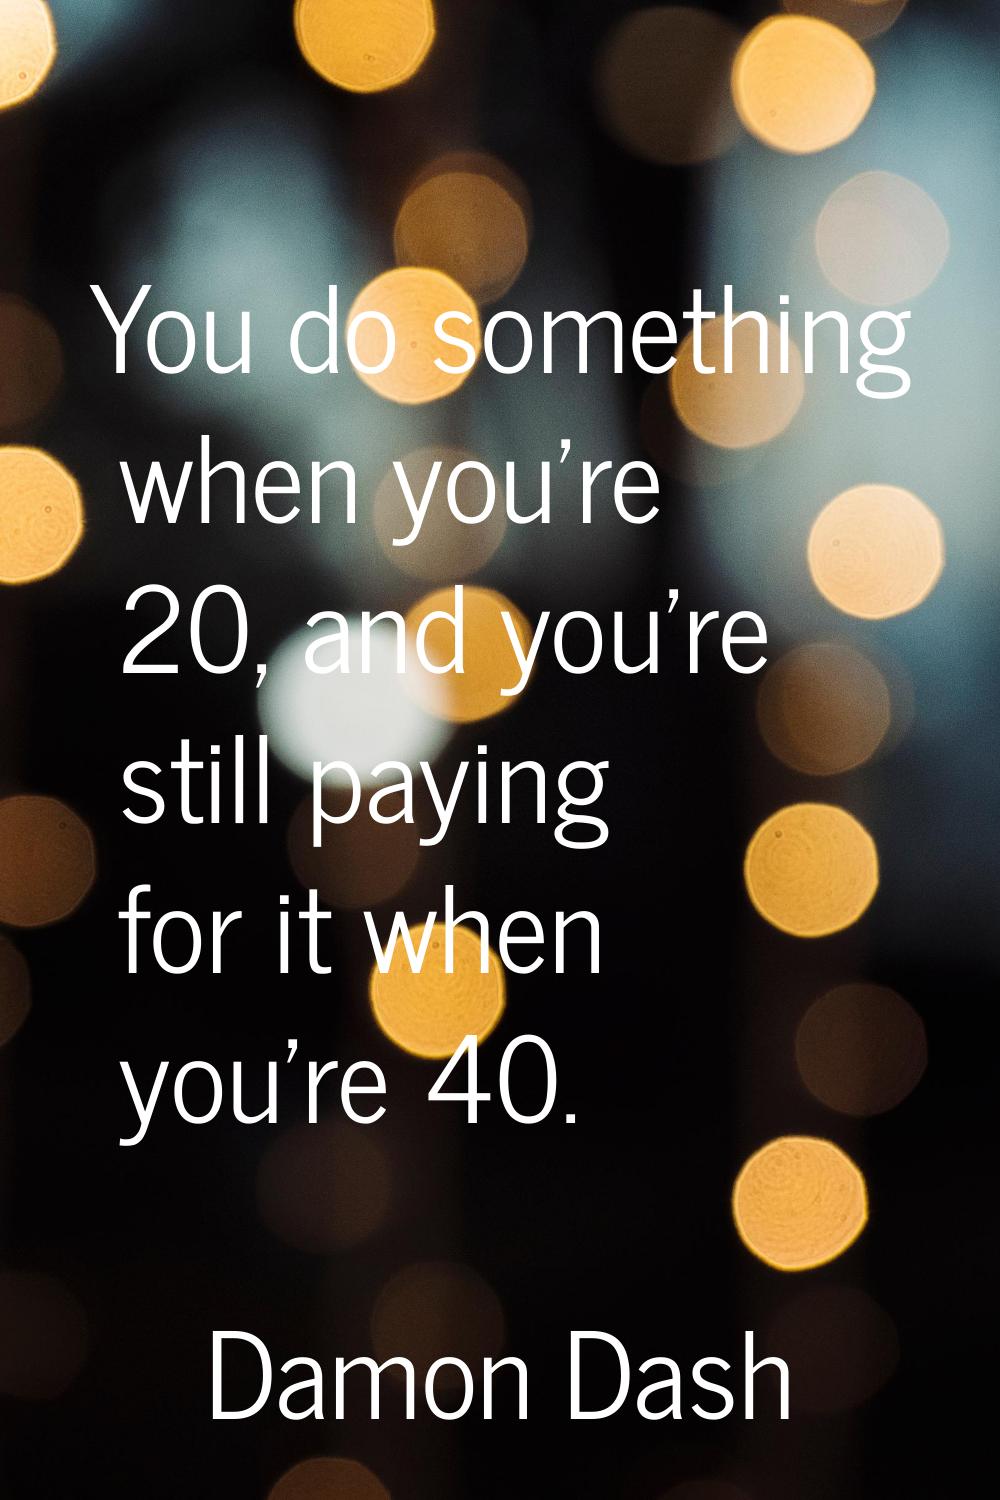 You do something when you're 20, and you're still paying for it when you're 40.